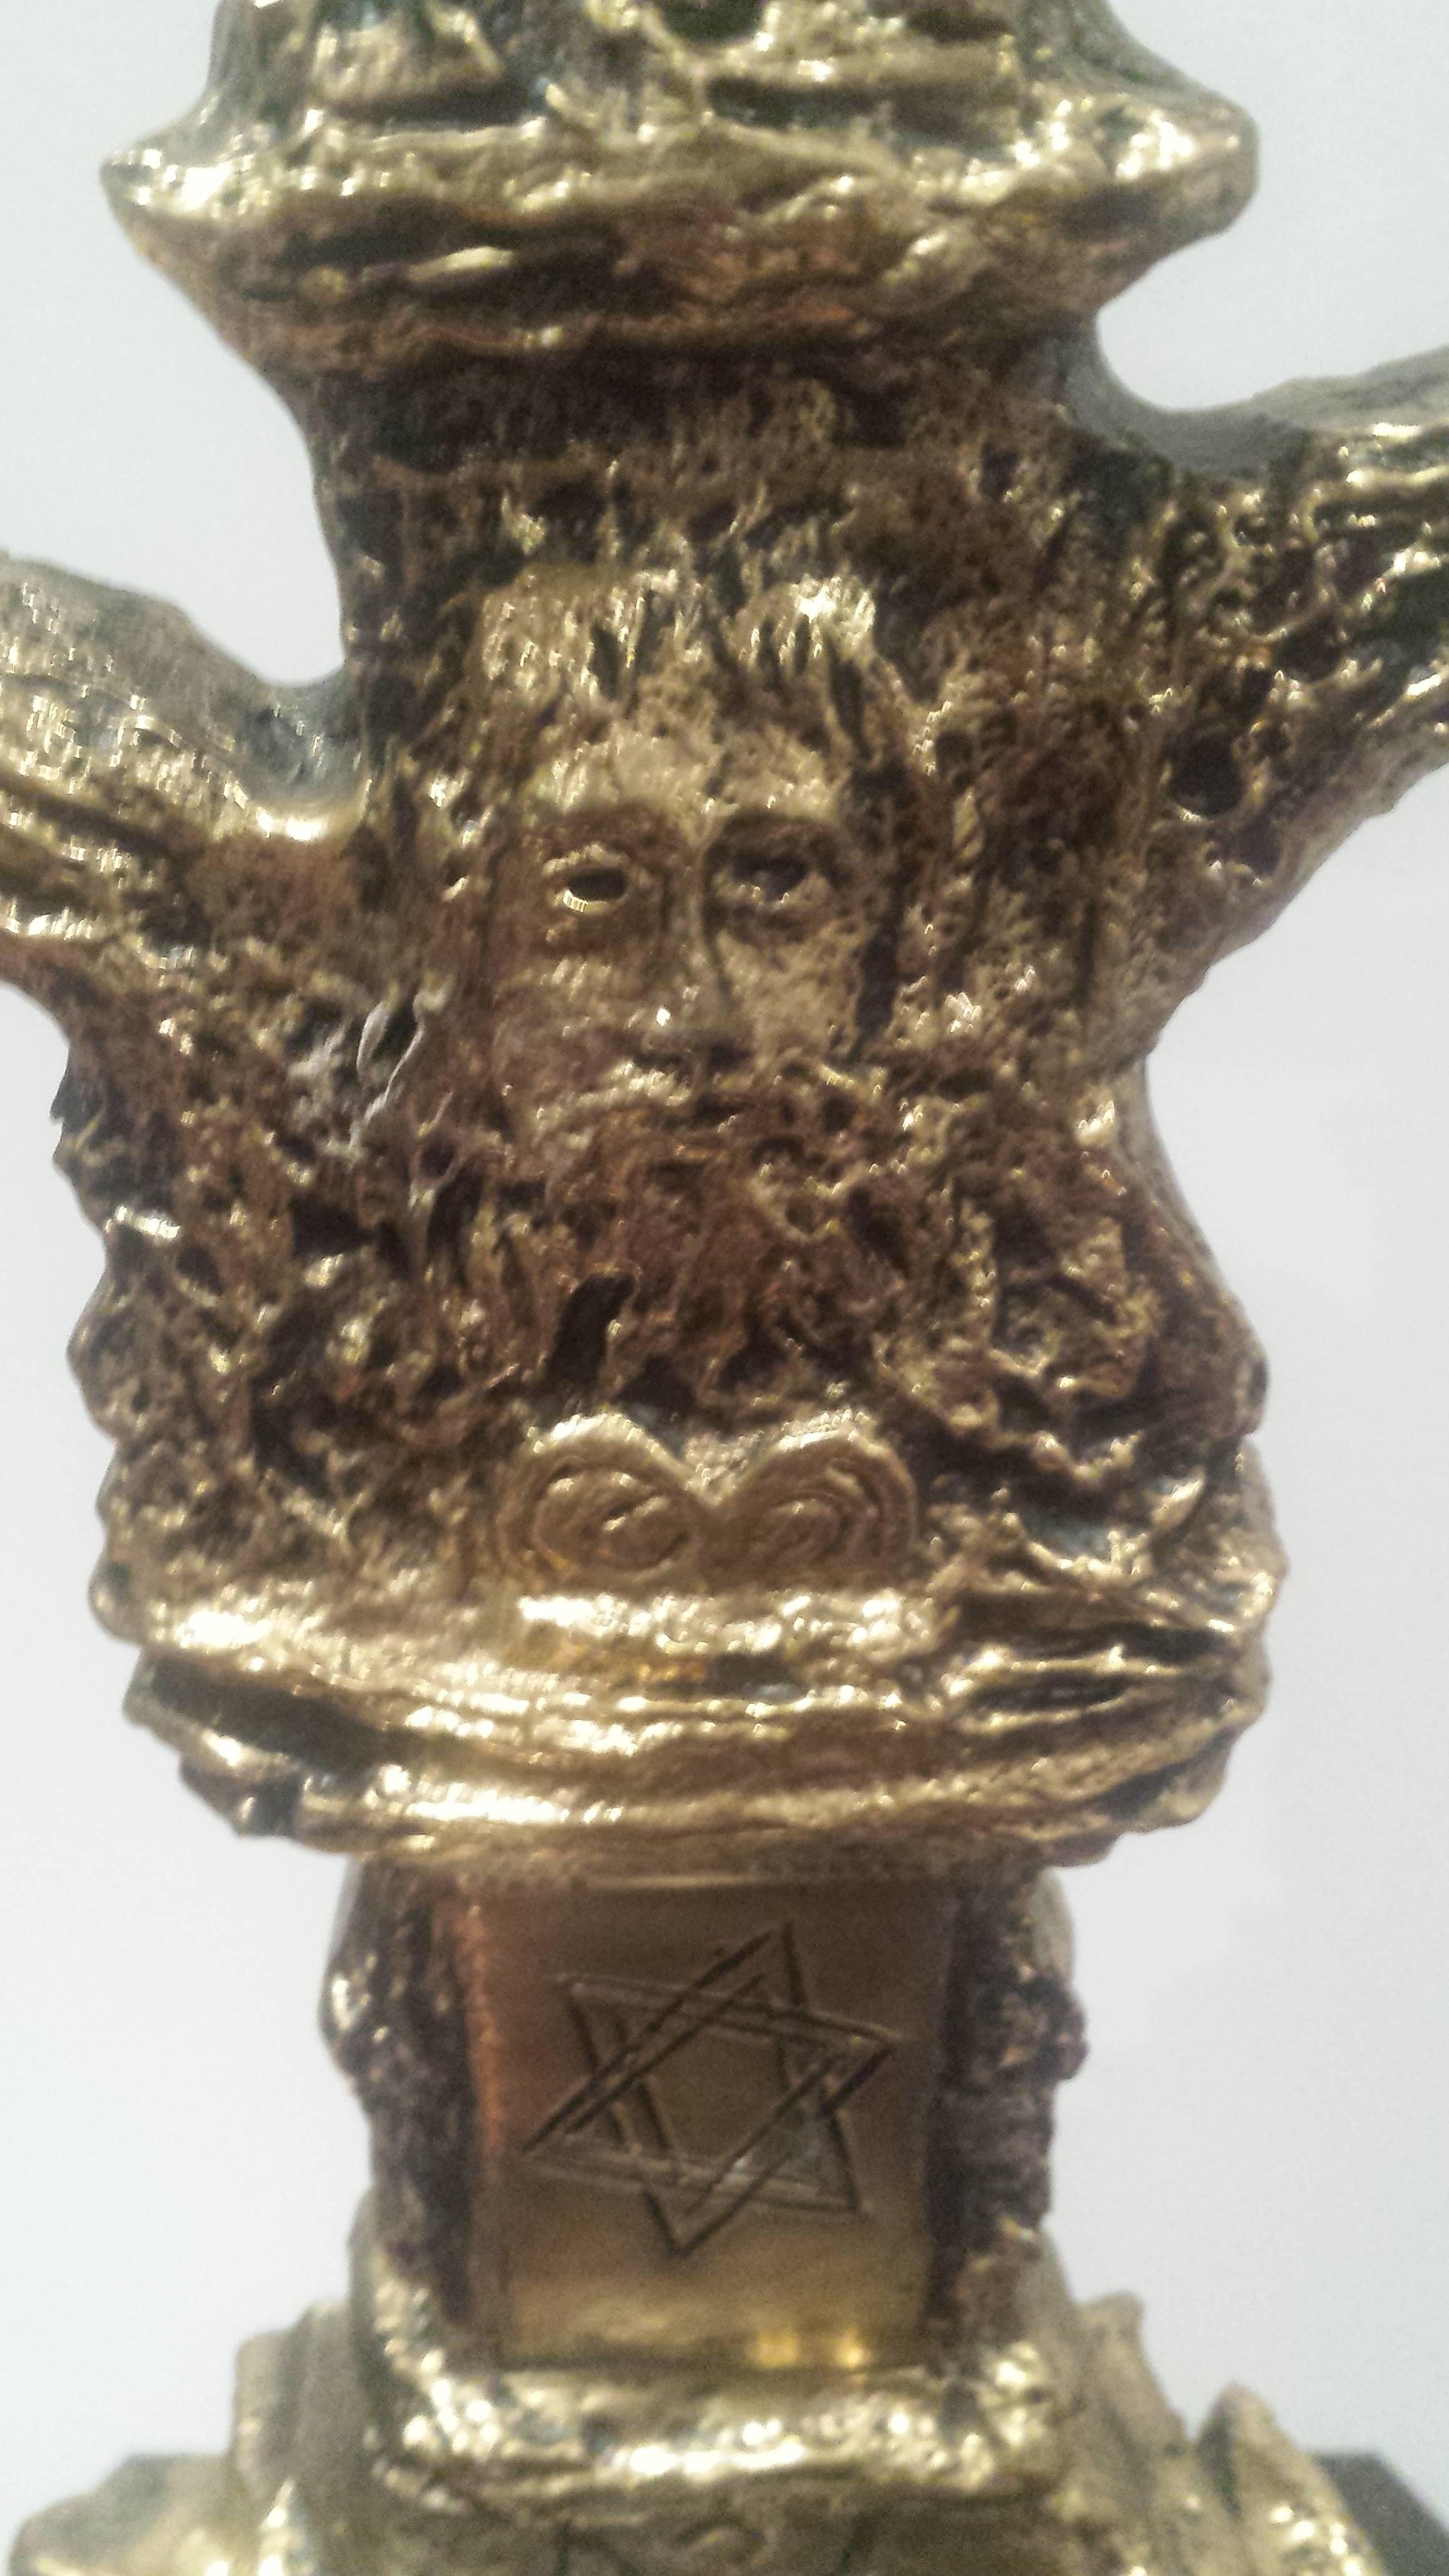 A Beautiful Judaica Gilt Bronze Sculpture of a Menorah, Salvador Dali, of seven-branched tree form, both sides centered by a head of Moses above a Star of David, the sconces with Hebrew inscriptions, mounted on a rough dark blue stone.
Signed and